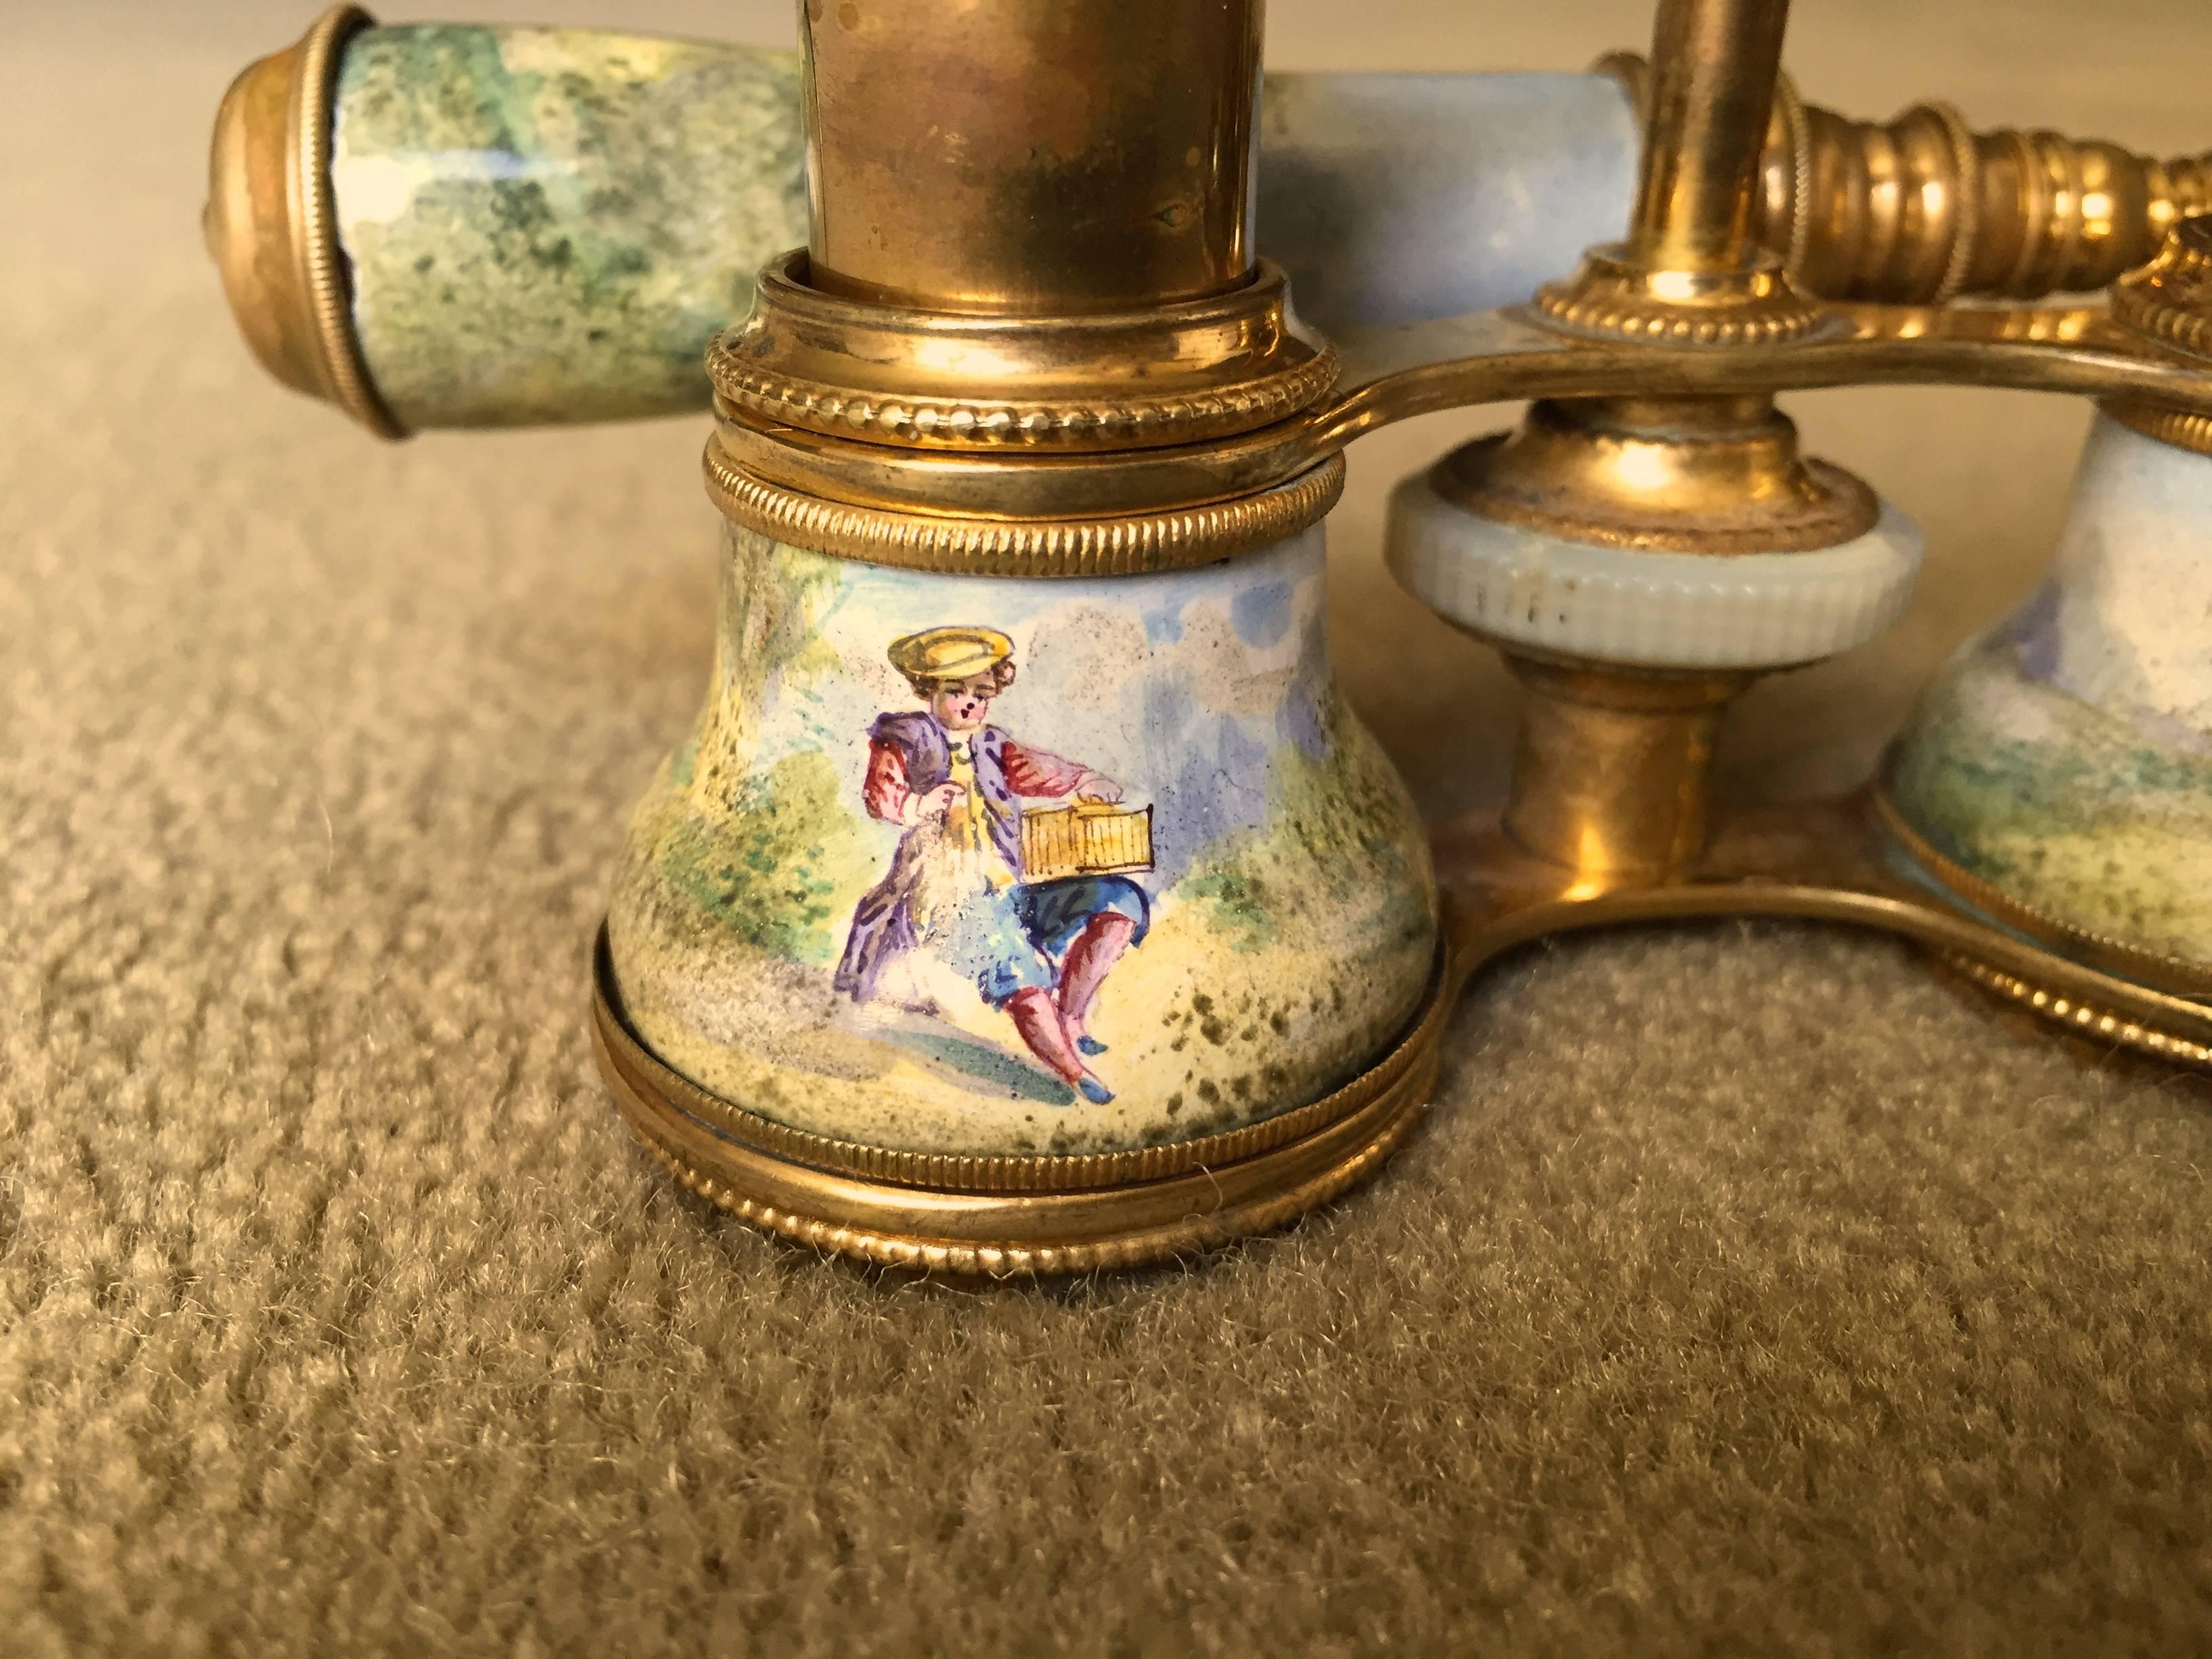 Late 19th Century French Enamel Opera Glasses Courtship Scenes Hand-Painted, circa 1880, Paris For Sale